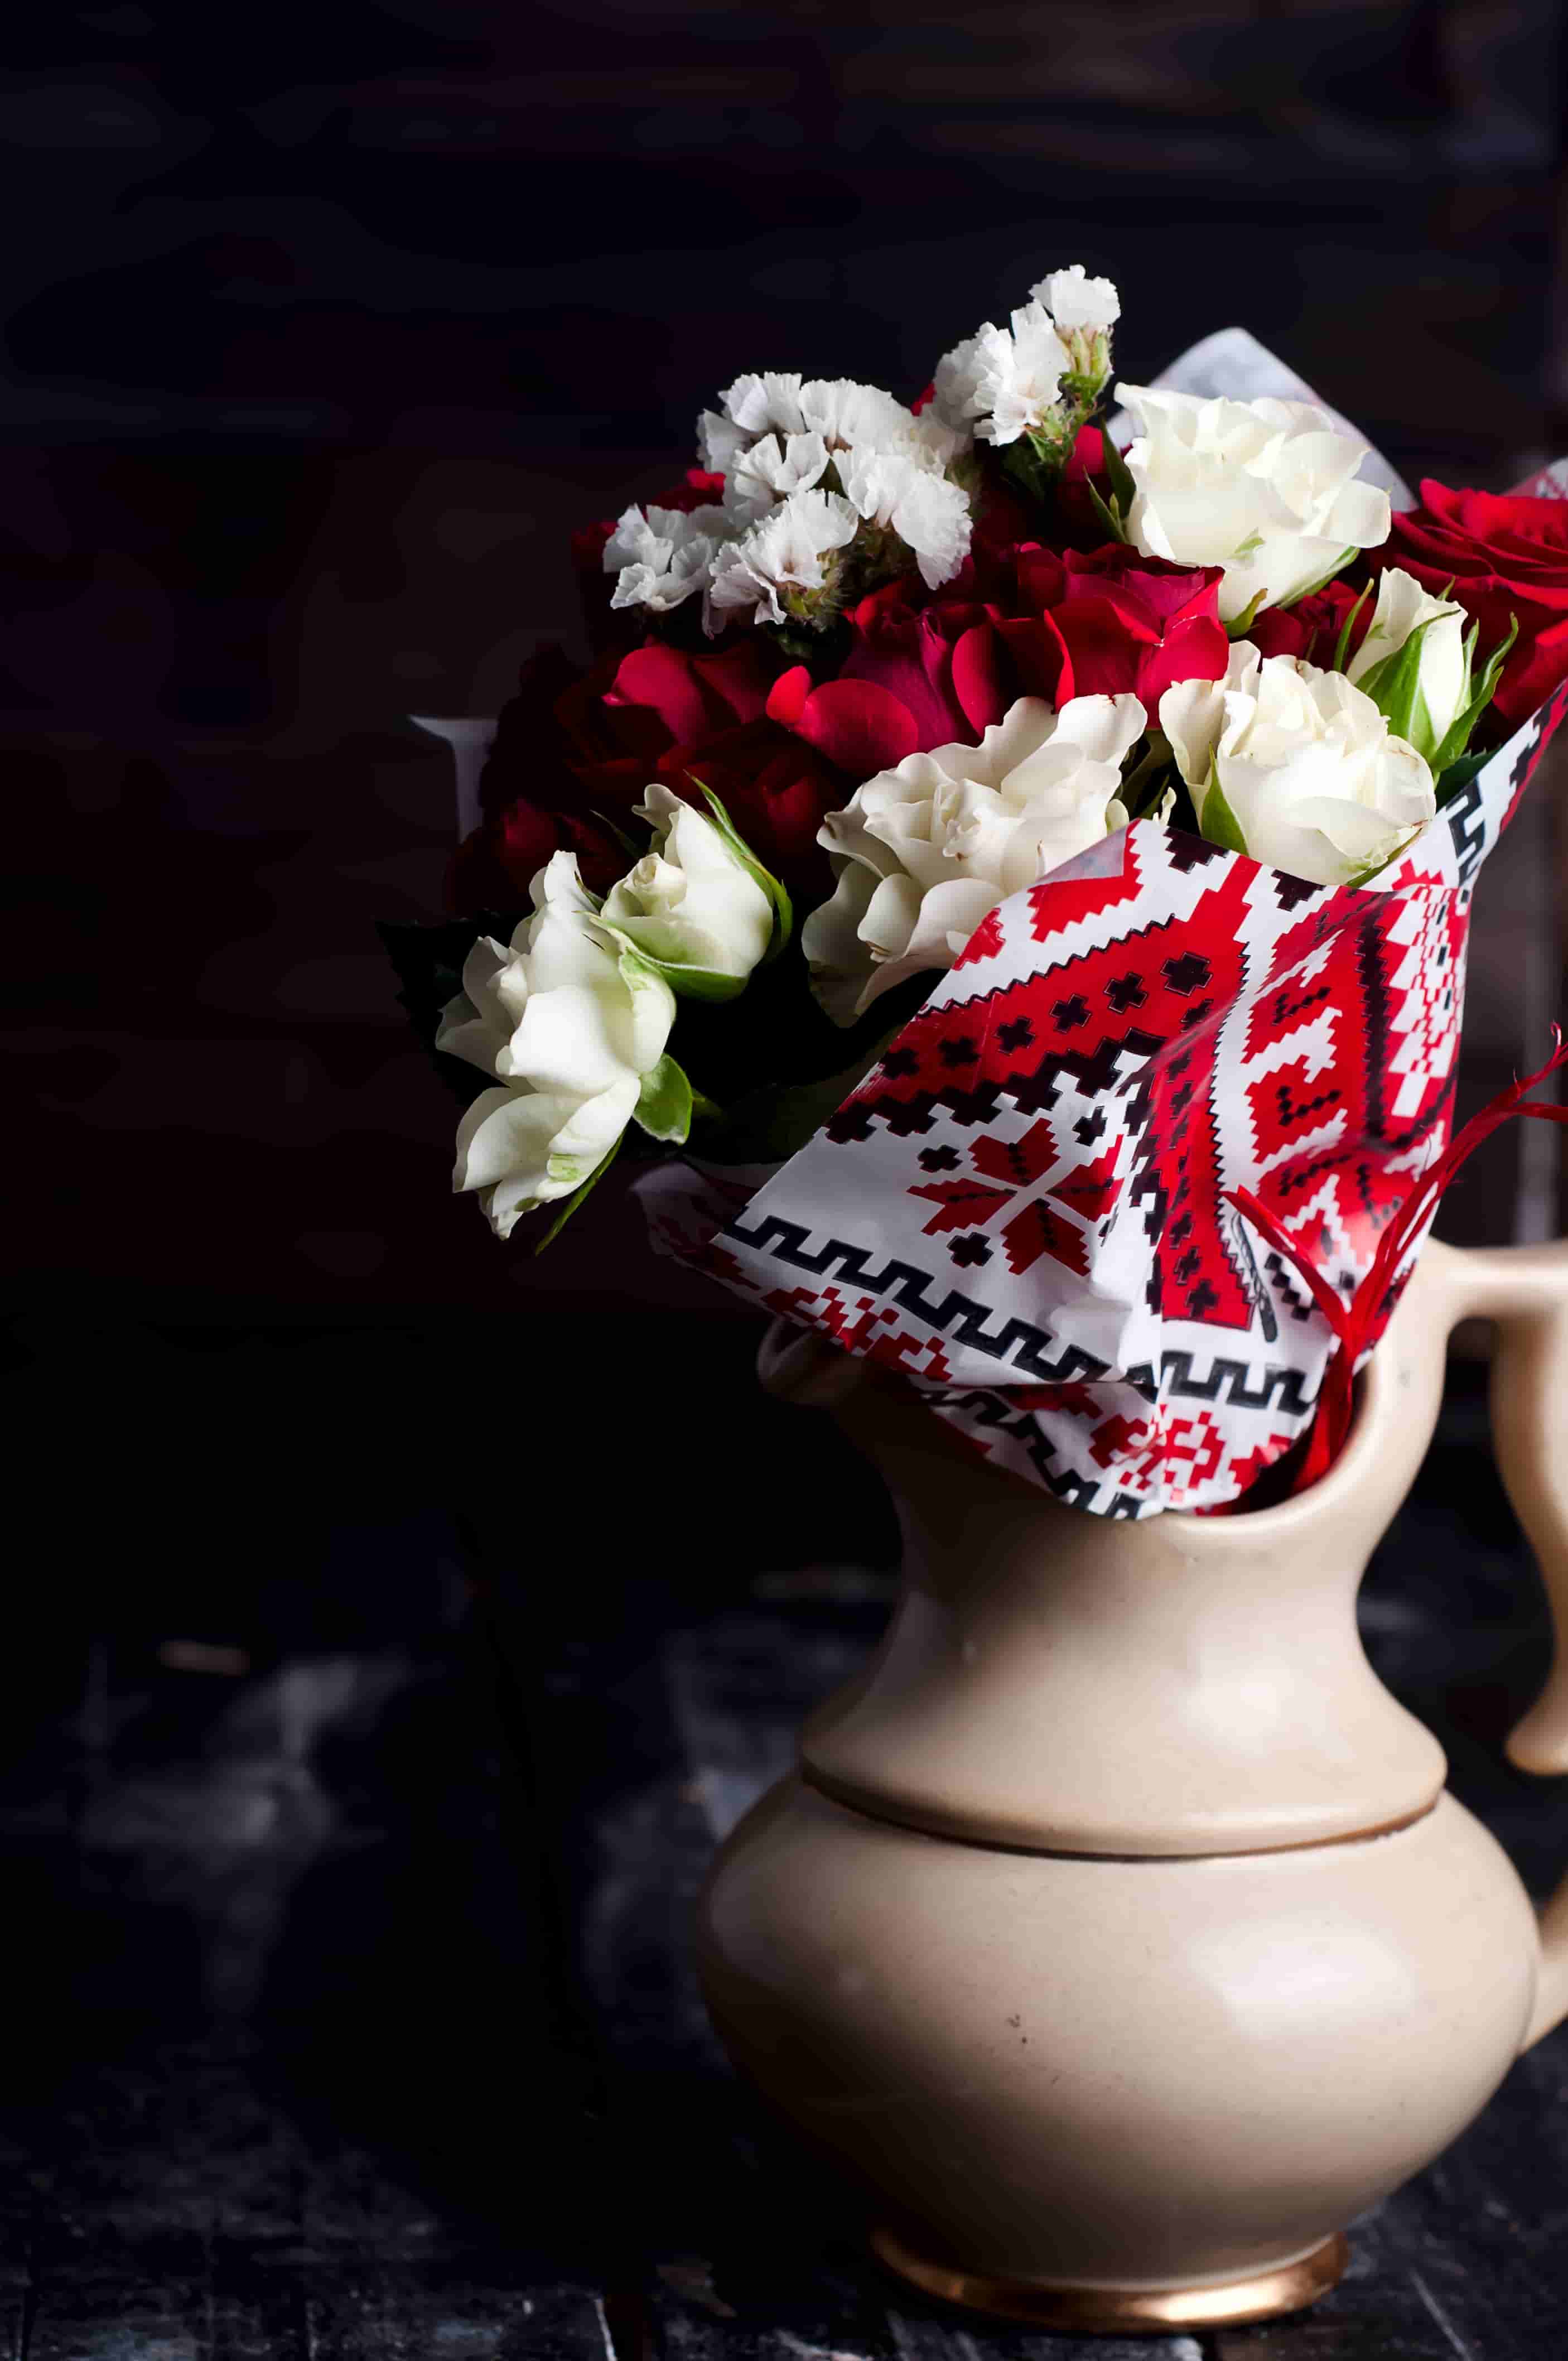 bouquet of red and white roses images in hd